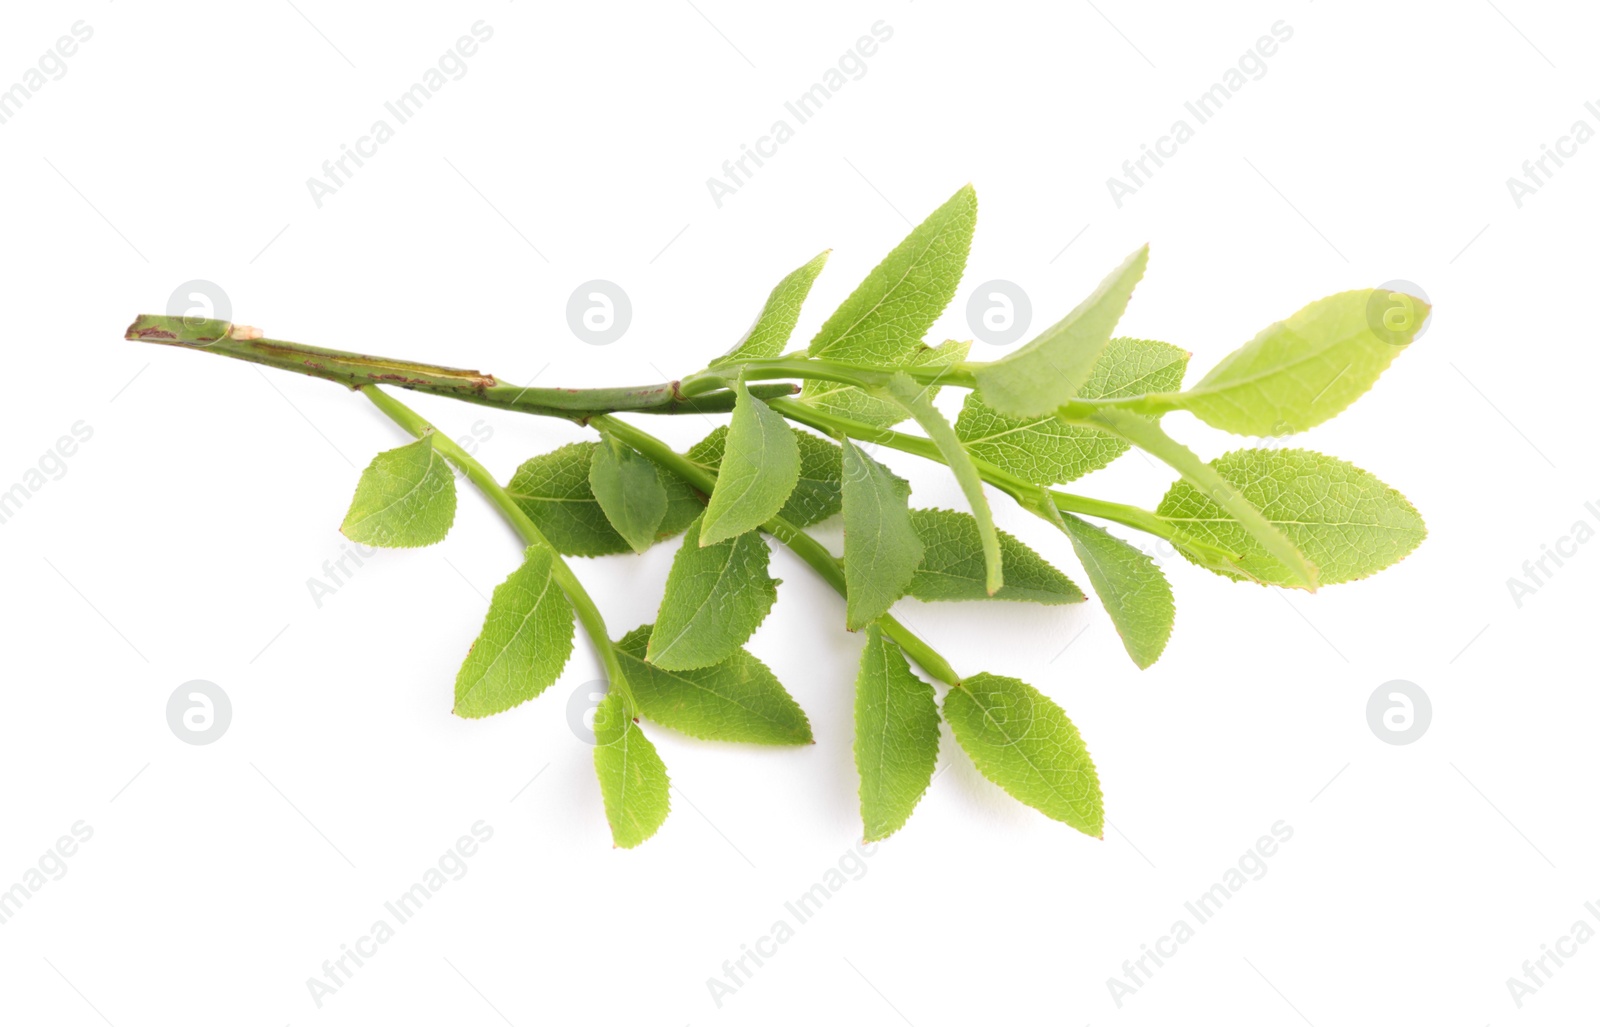 Photo of Bilberry branch with fresh green leaves isolated on white